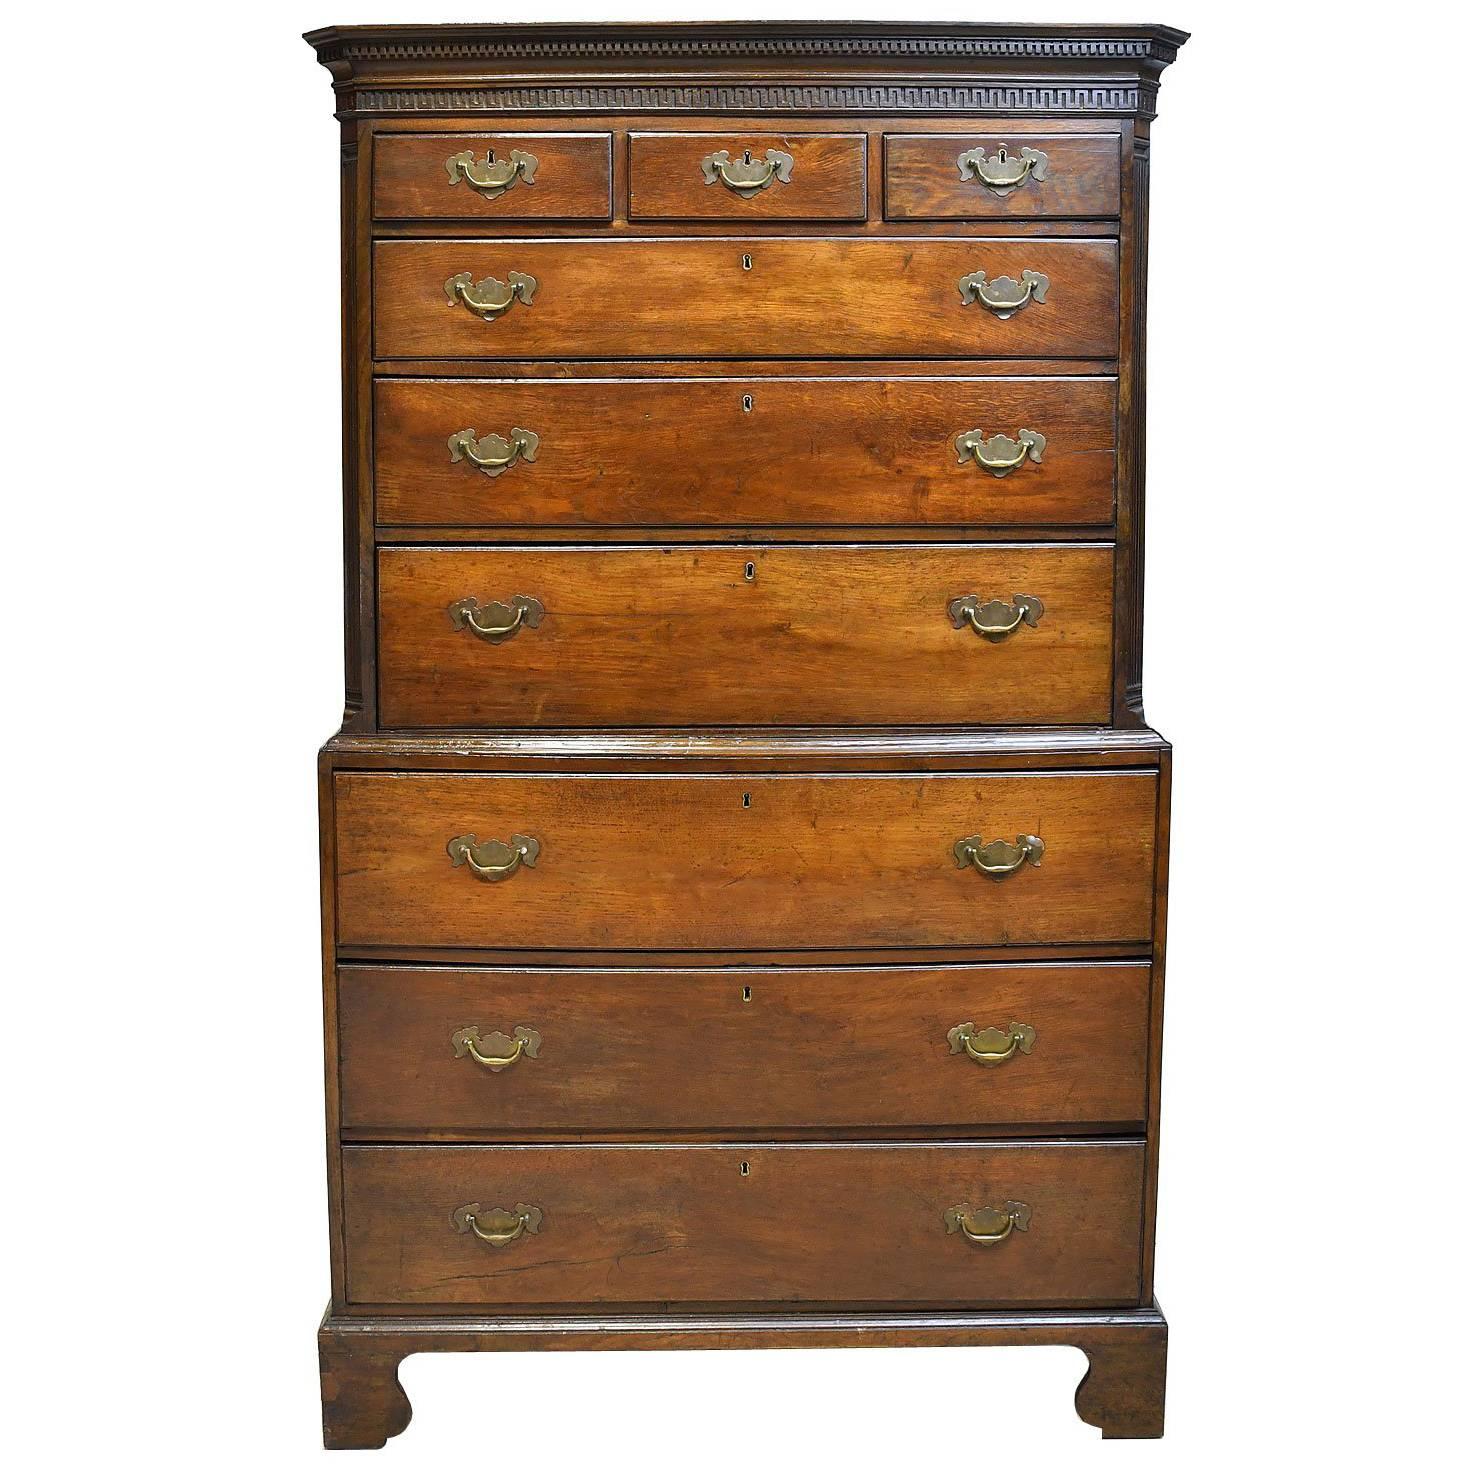 A very handsome early Georgian highboy or chest on chest with dentil moulded cornice above Greek-key moulding, with three drawers over six graduated drawers with original brass escutcheon plates and swan-neck bail handles. The bottom drawer of top